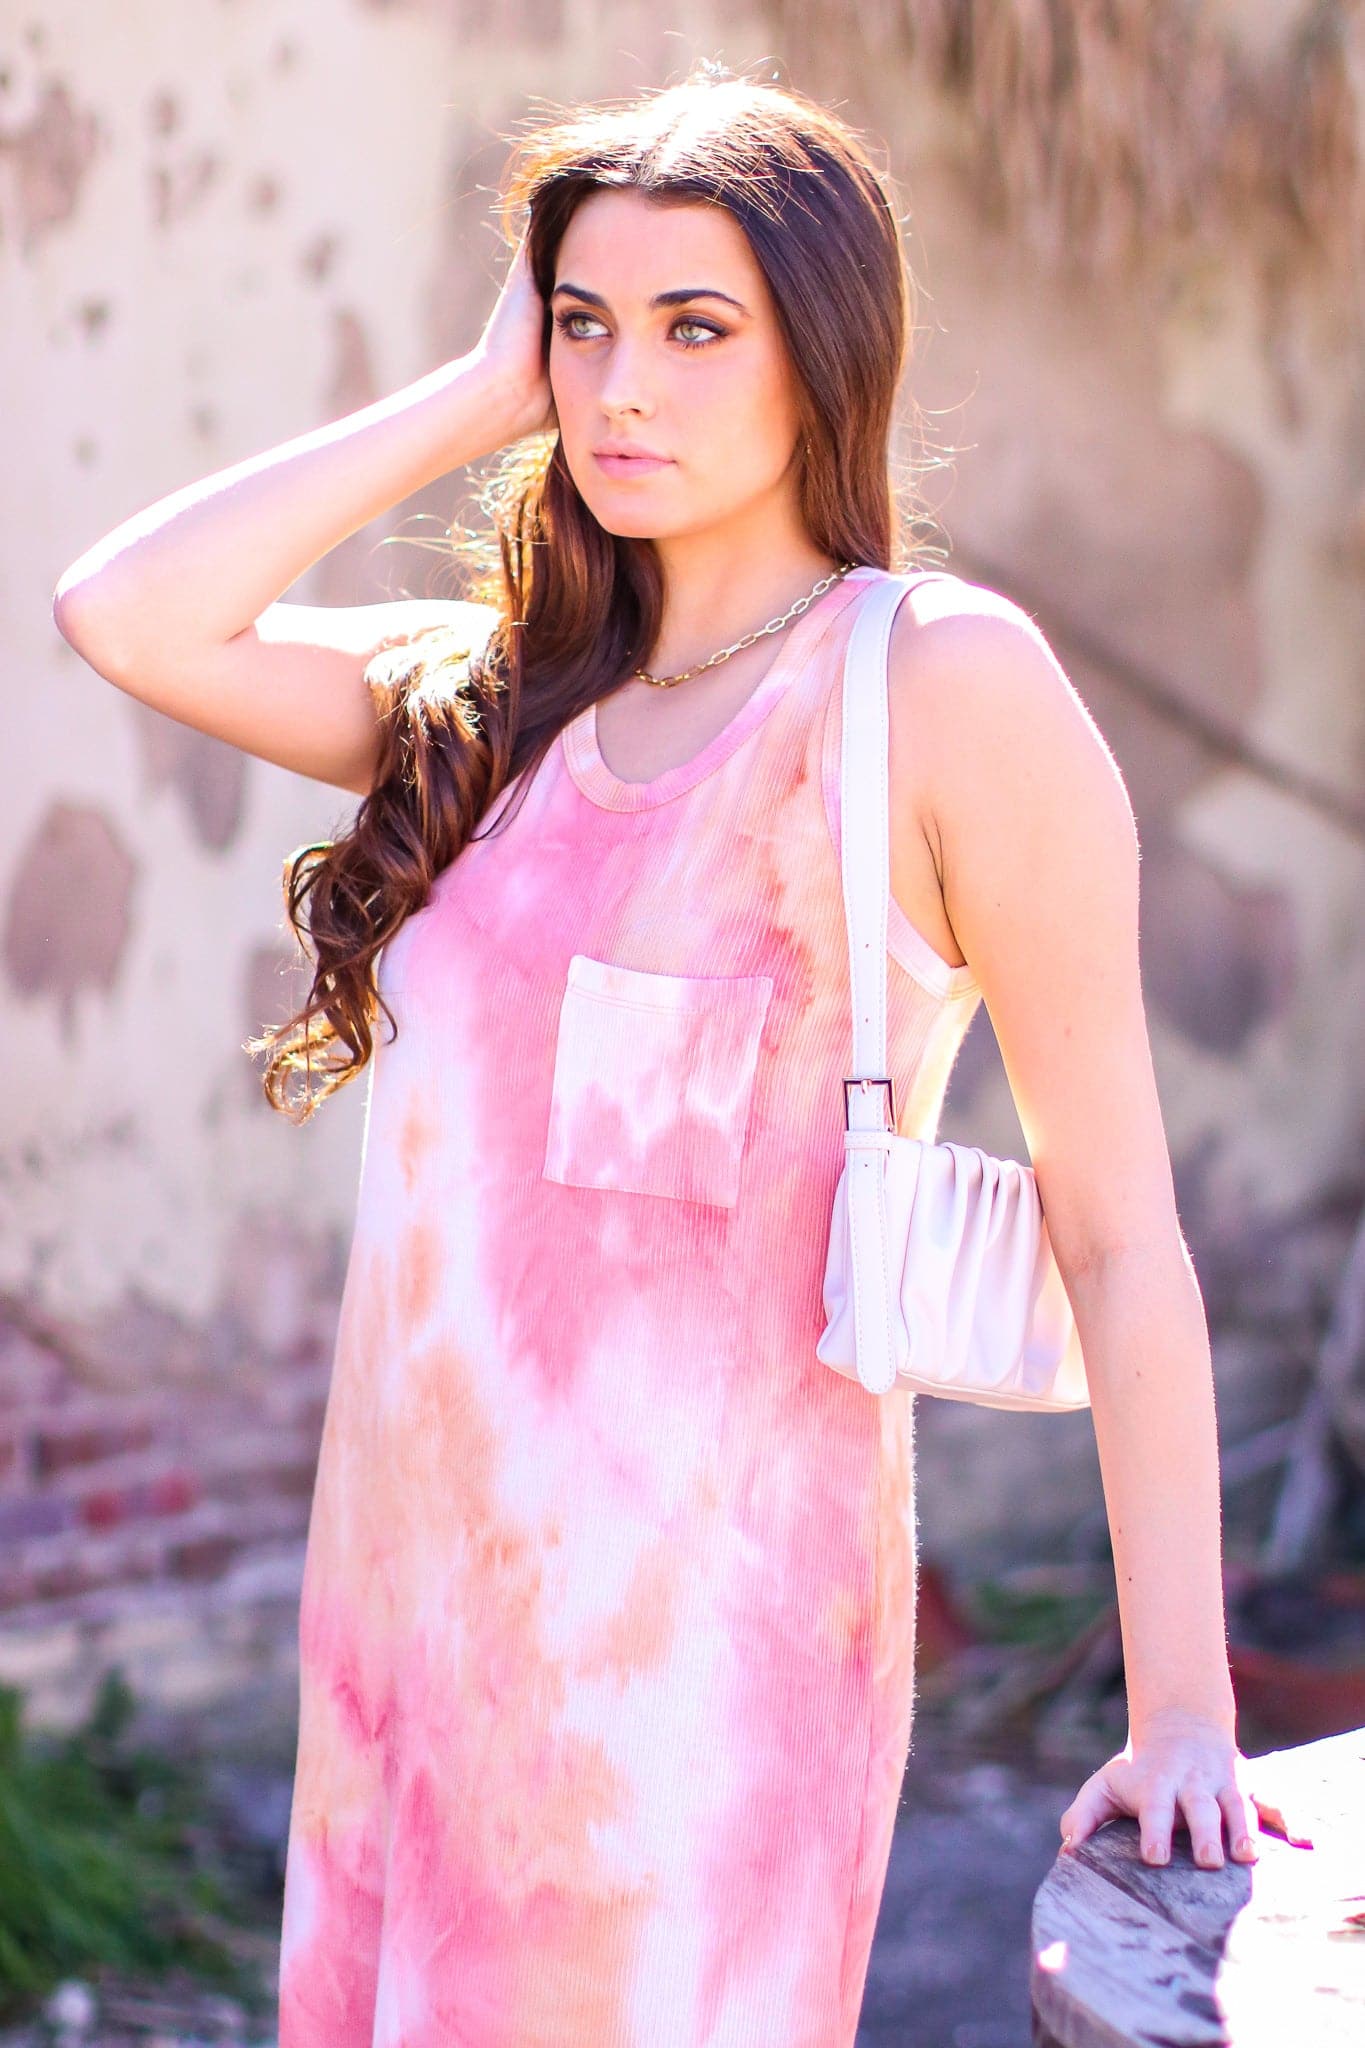  Simply Stylish Ruffled Faux Leather Bag - FINAL SALE - Madison and Mallory